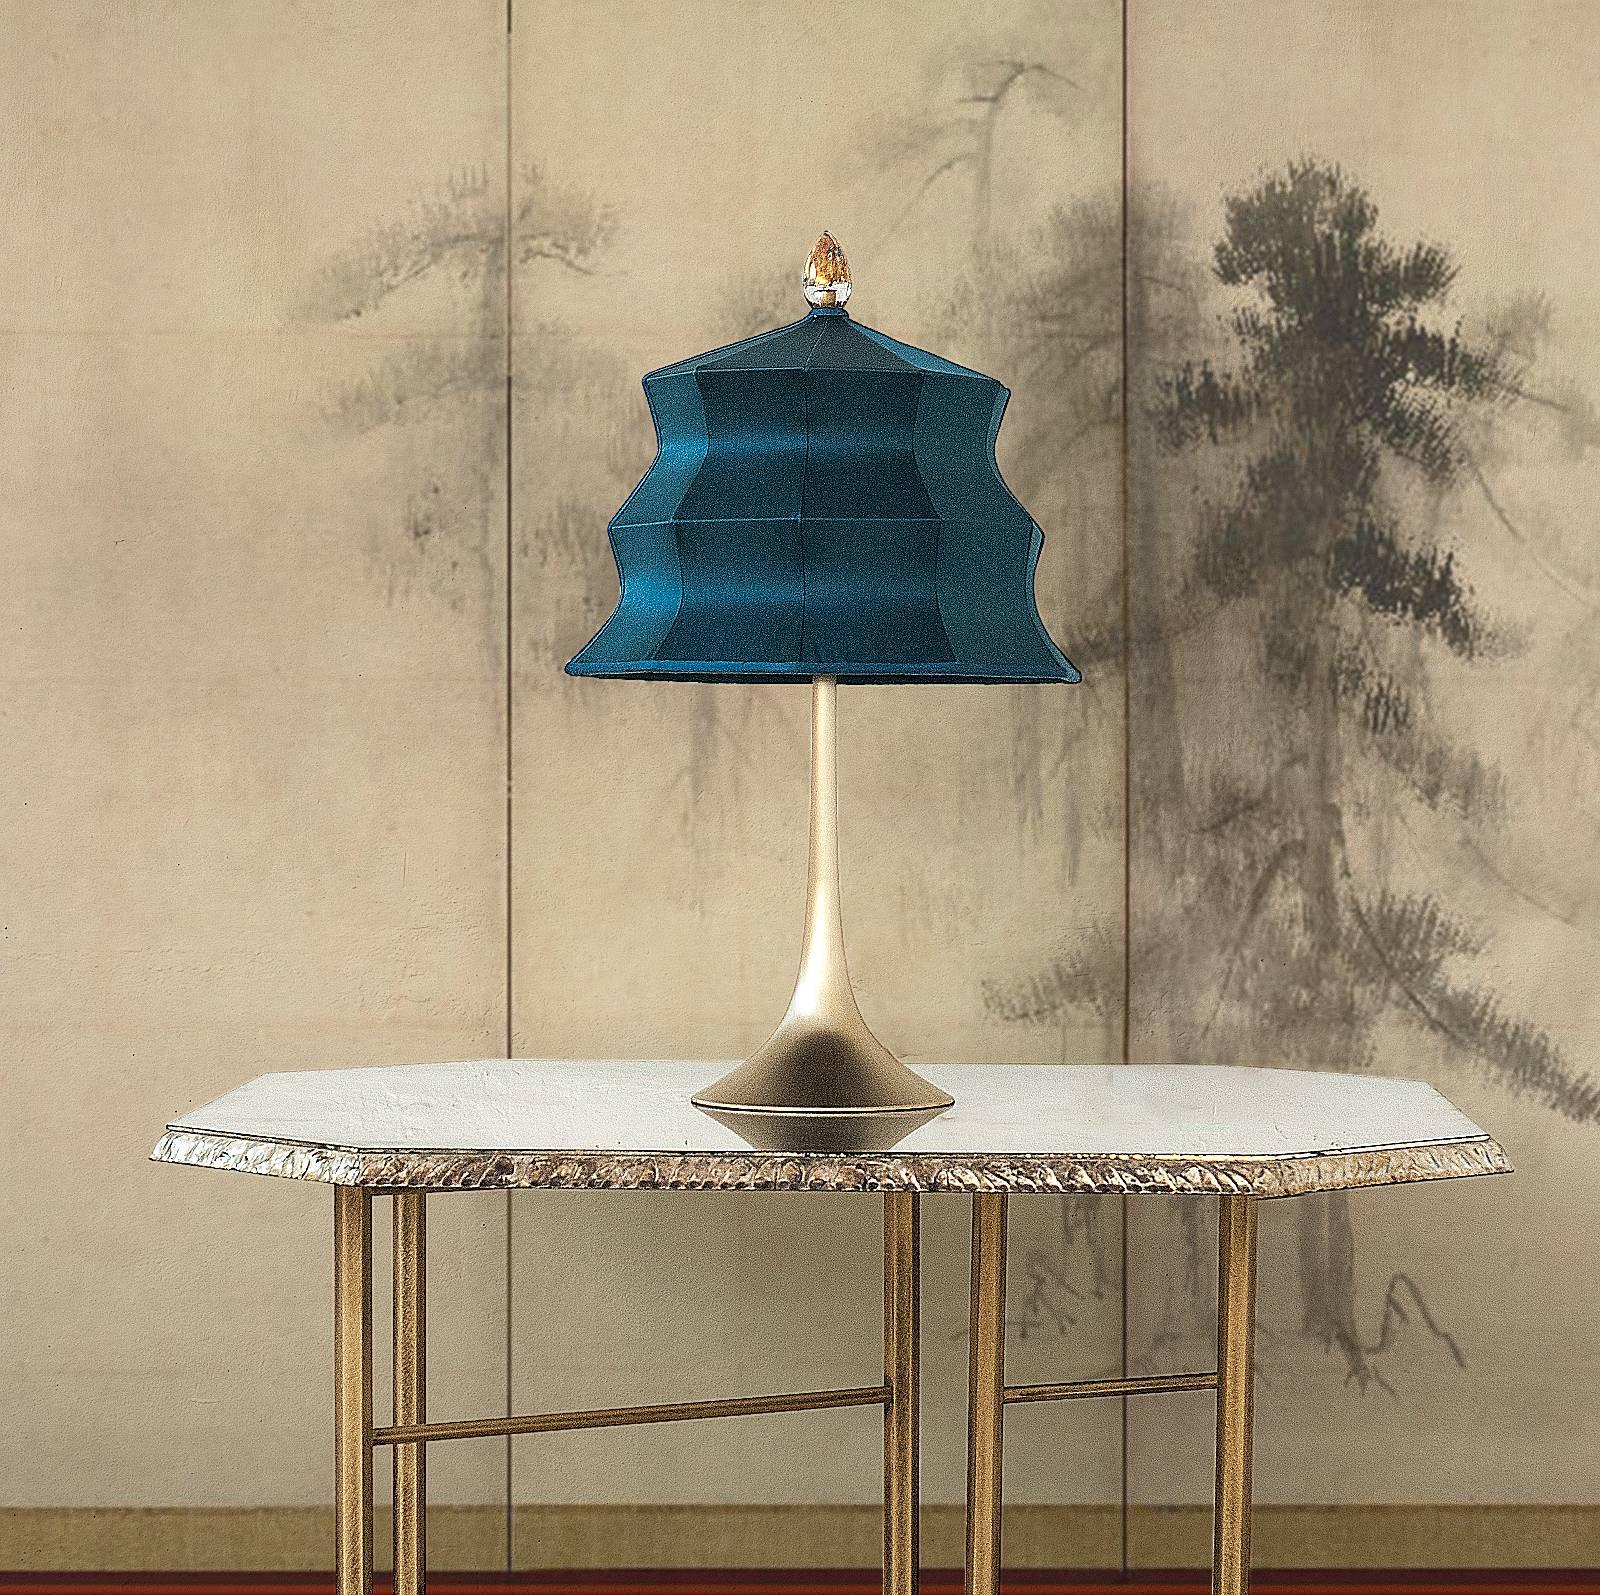 Silvered  “Pagoda” Table Lamp, in copper  and rose Silk, Silver Crystal Tip, Handmade